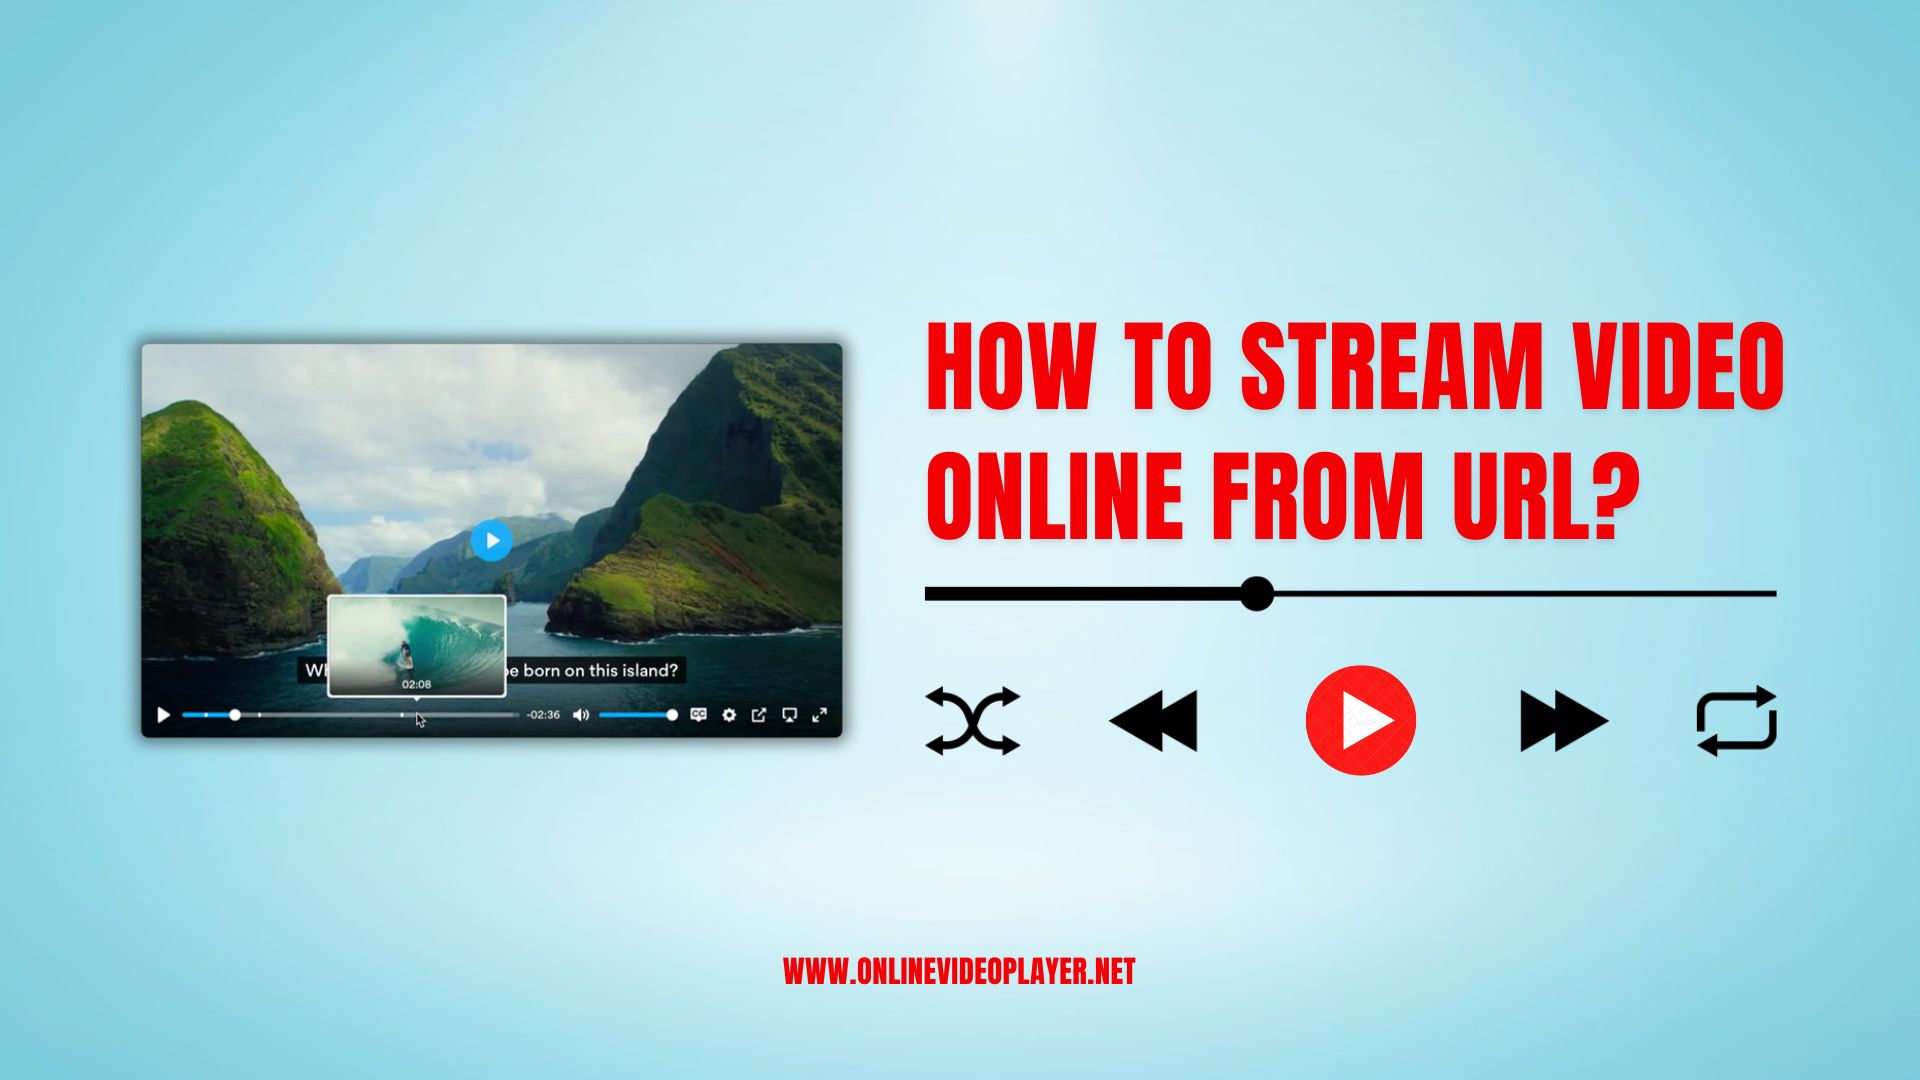 How to Stream Video Online from URL